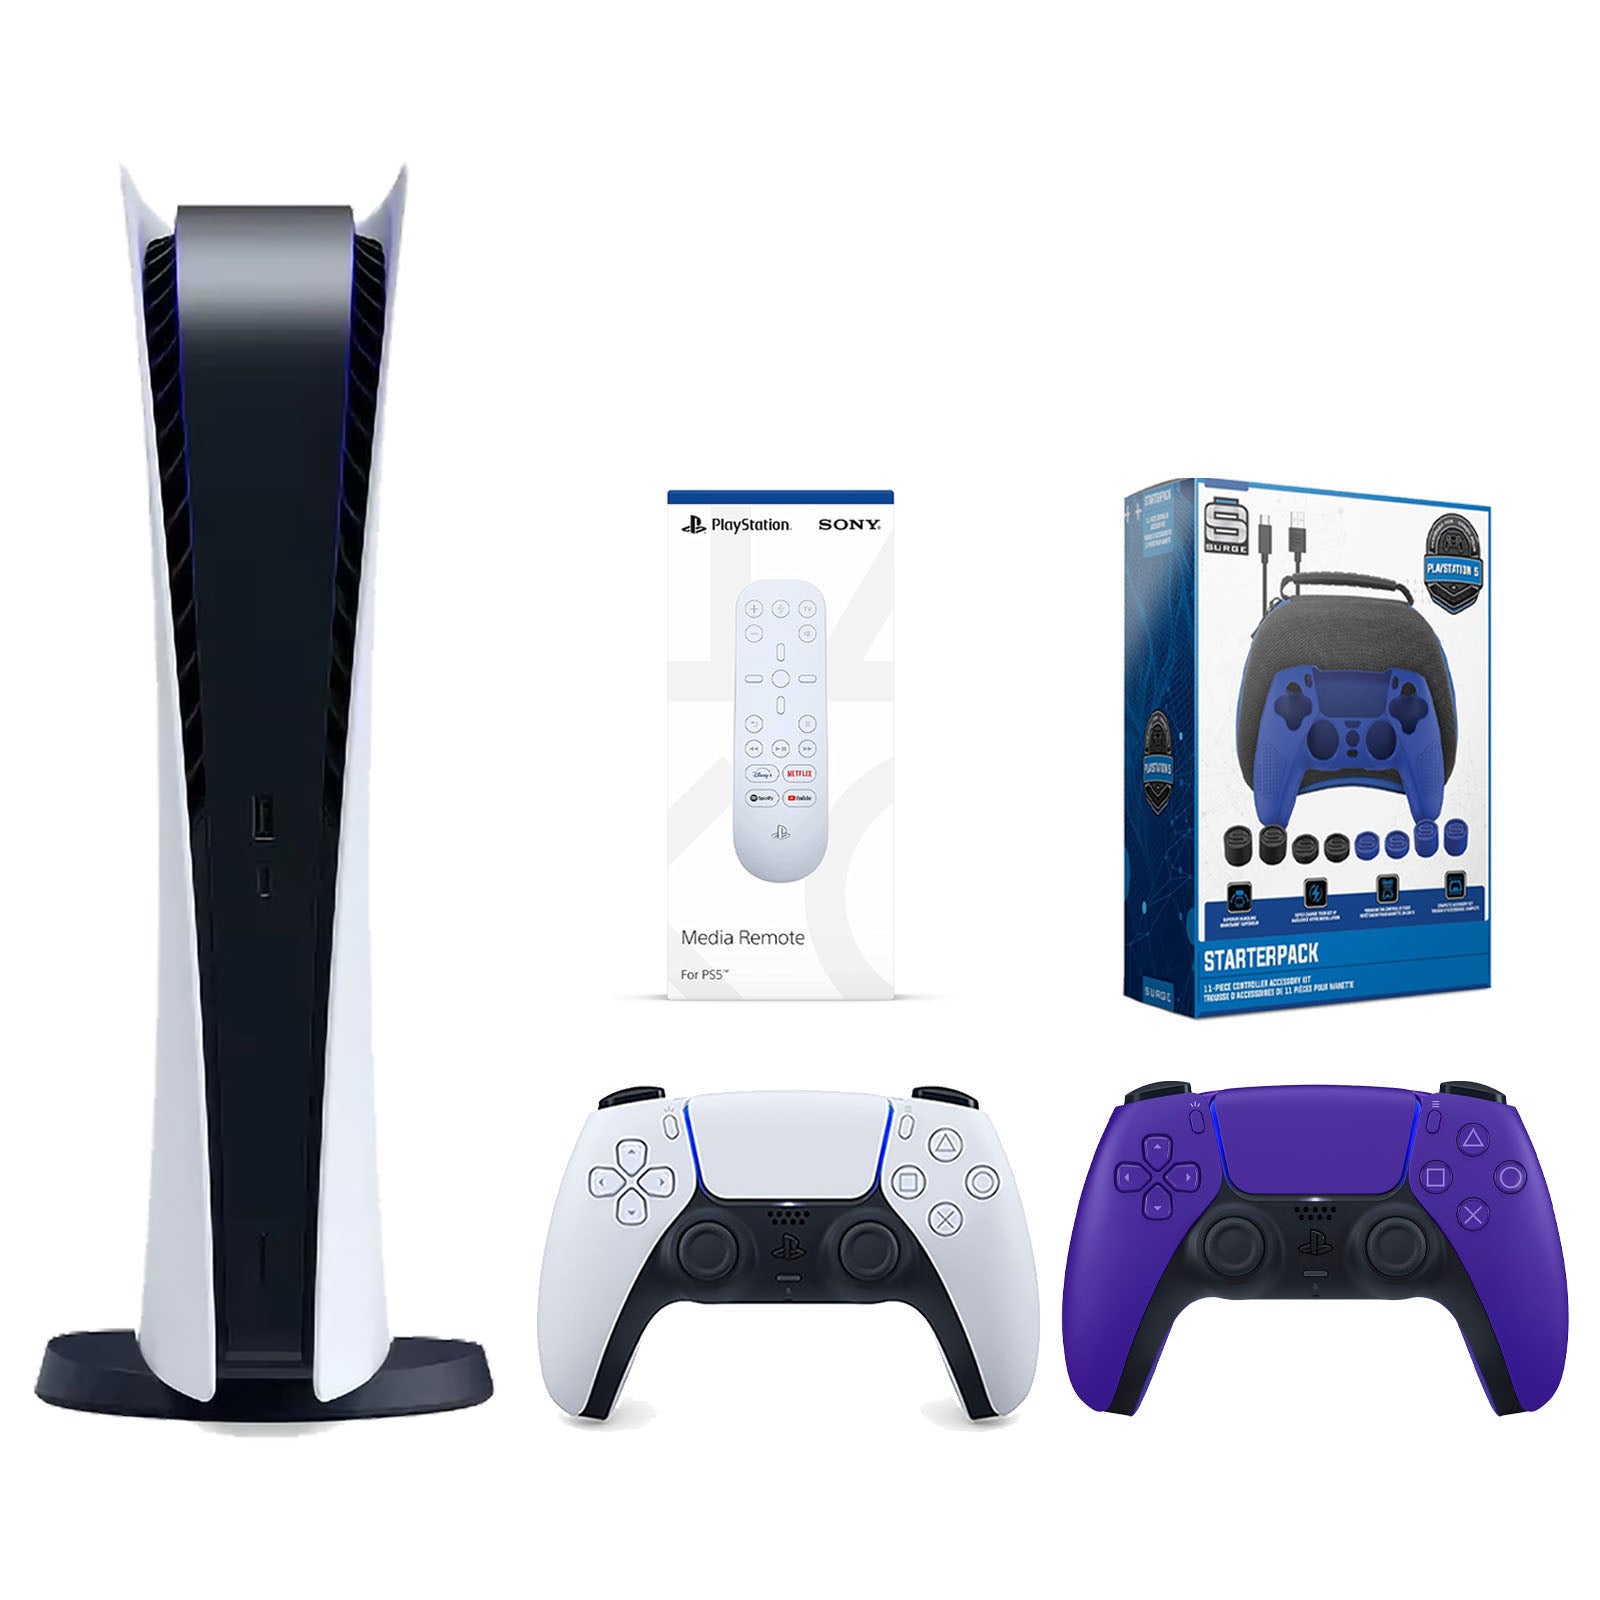 Sony Playstation 5 Digital Edition Console with Extra Purple Controller, Media Remote and Surge Pro Gamer Starter Pack 11-Piece Accessory Bundle - Pro-Distributing